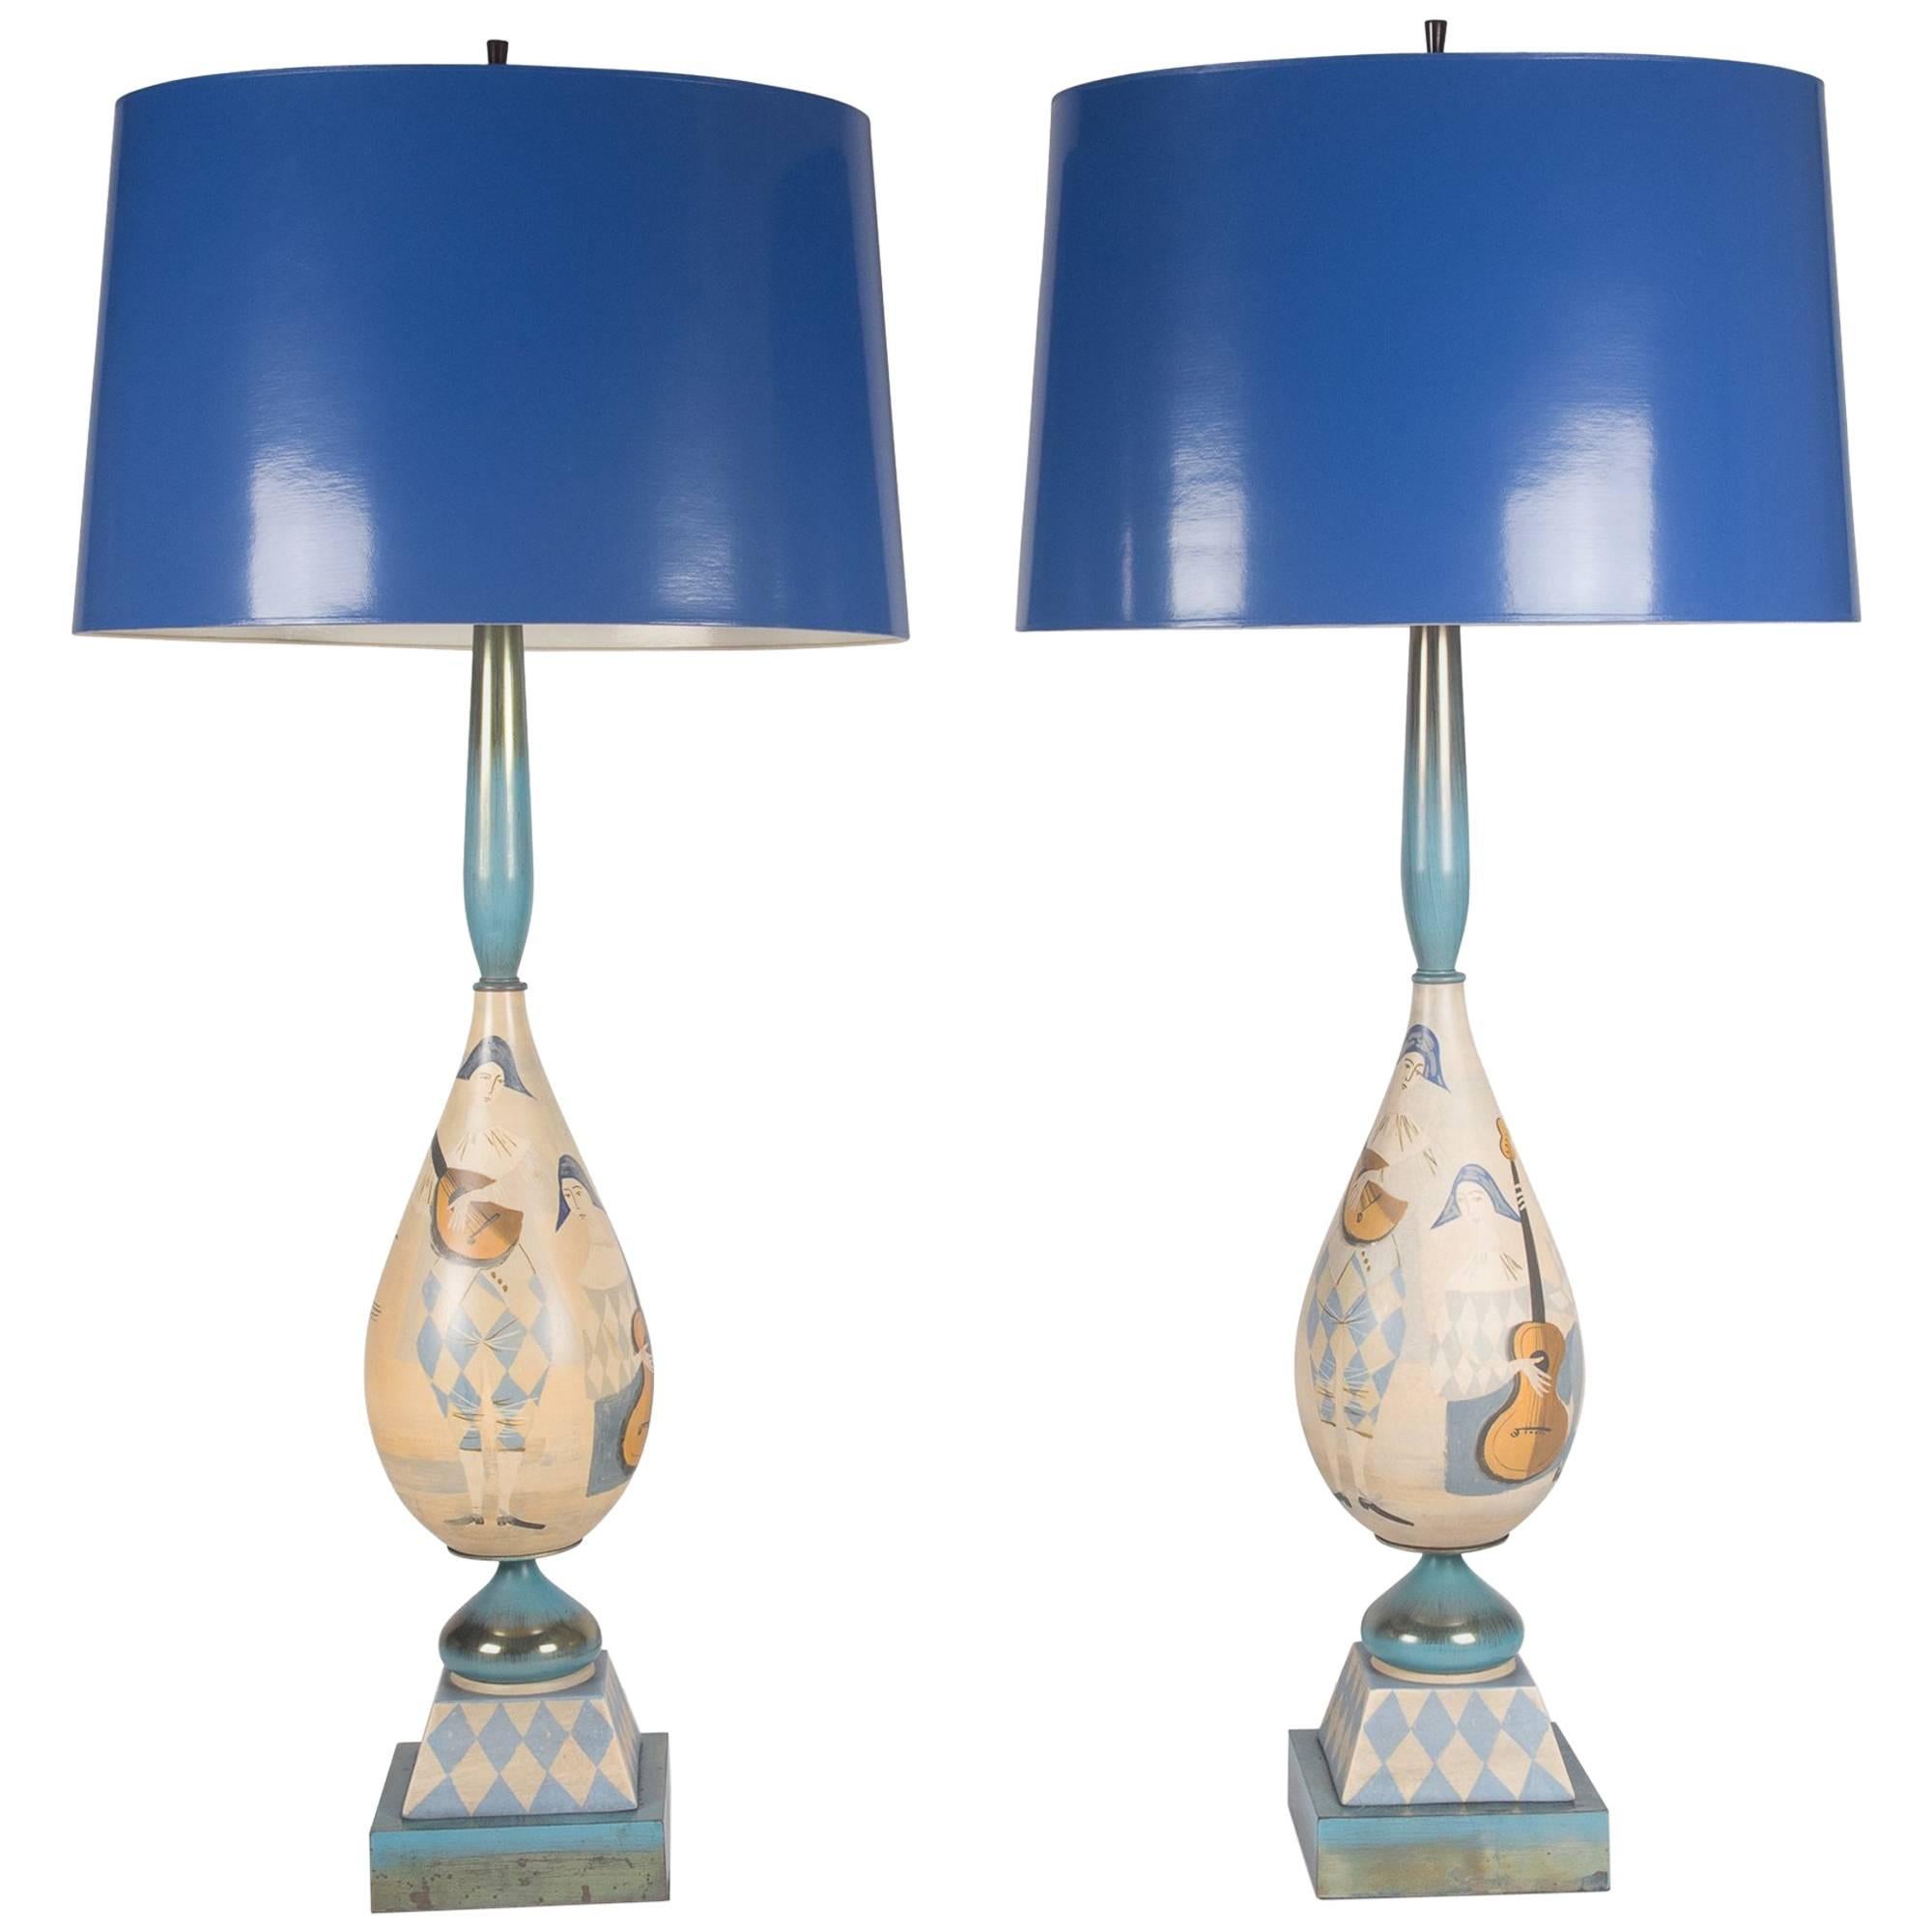 Italian Hand-Painted Wood Table Lamps, 1930s For Sale